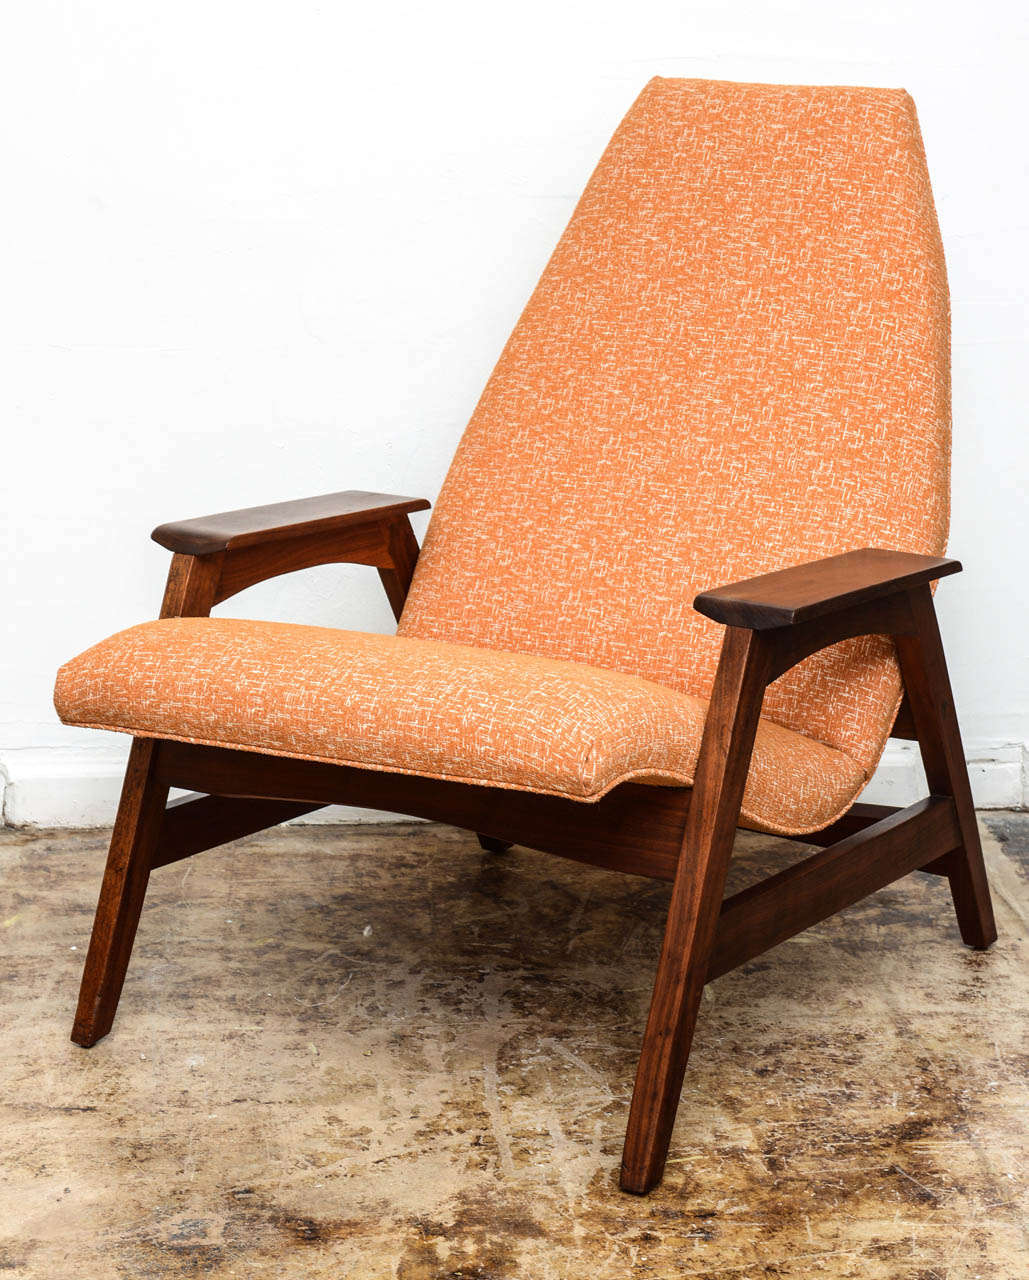 Mid-20th Century Sculptural Mid-Century Chair and Ottoman, Attributed to Nakashima for Widdicomb